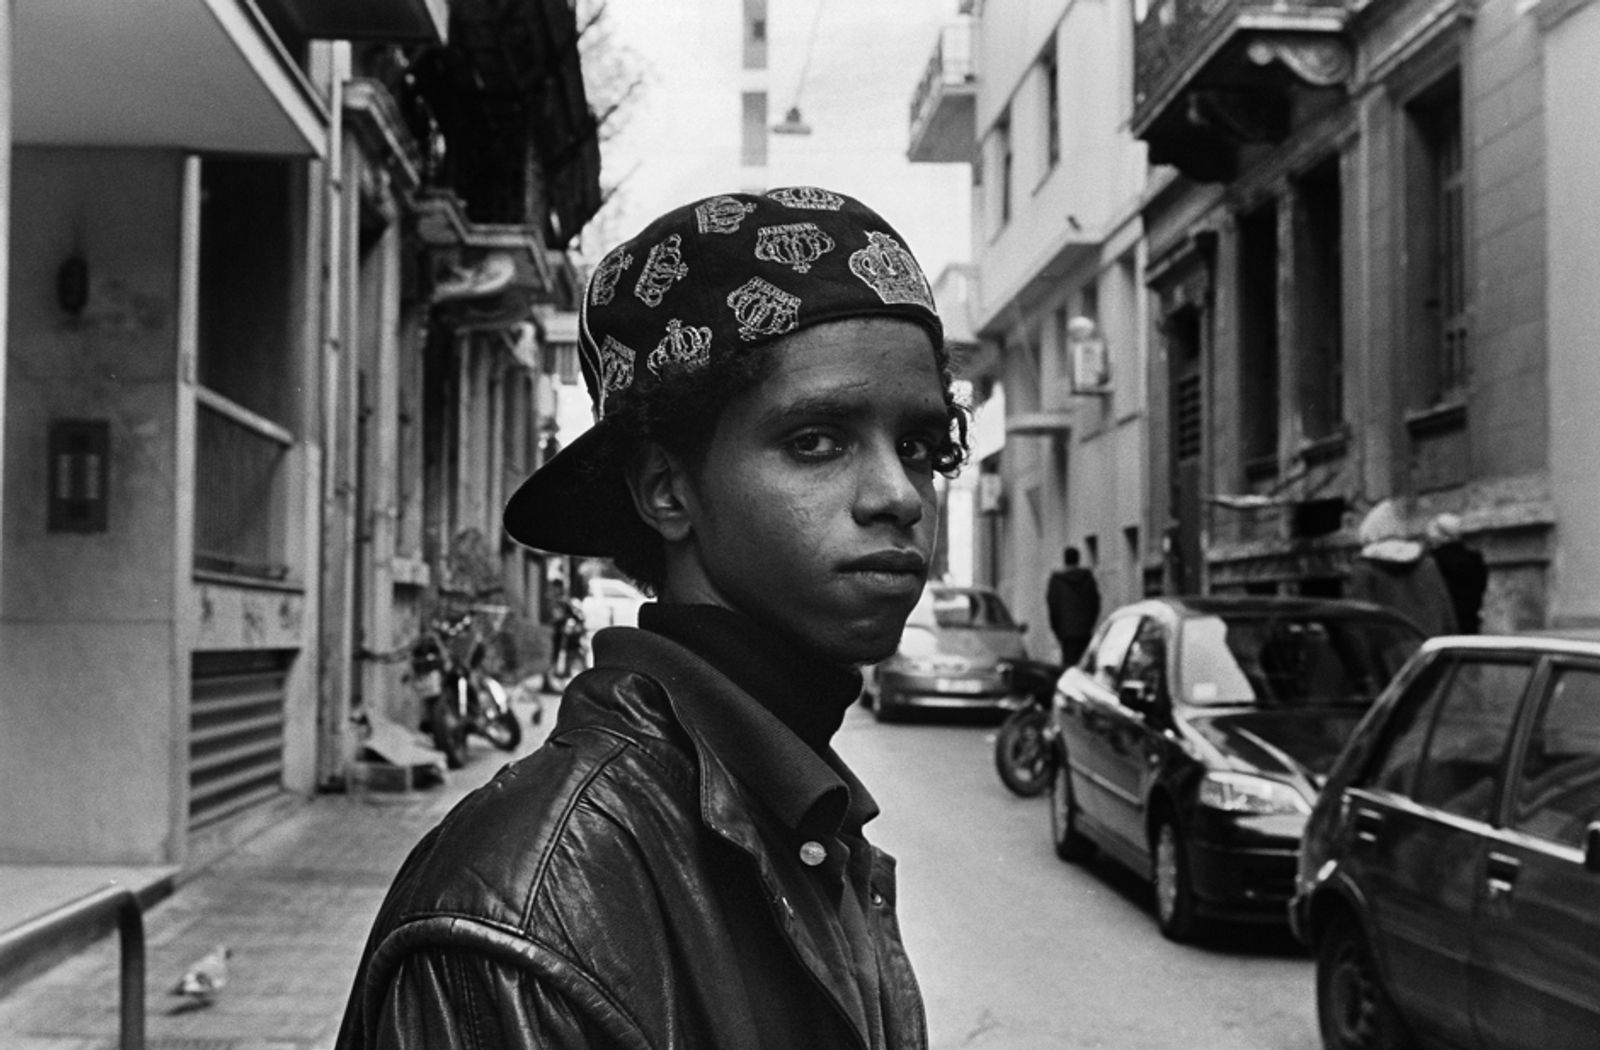 © Stephen Boyle - Somali migrant boy in the street in central Athens. 2011